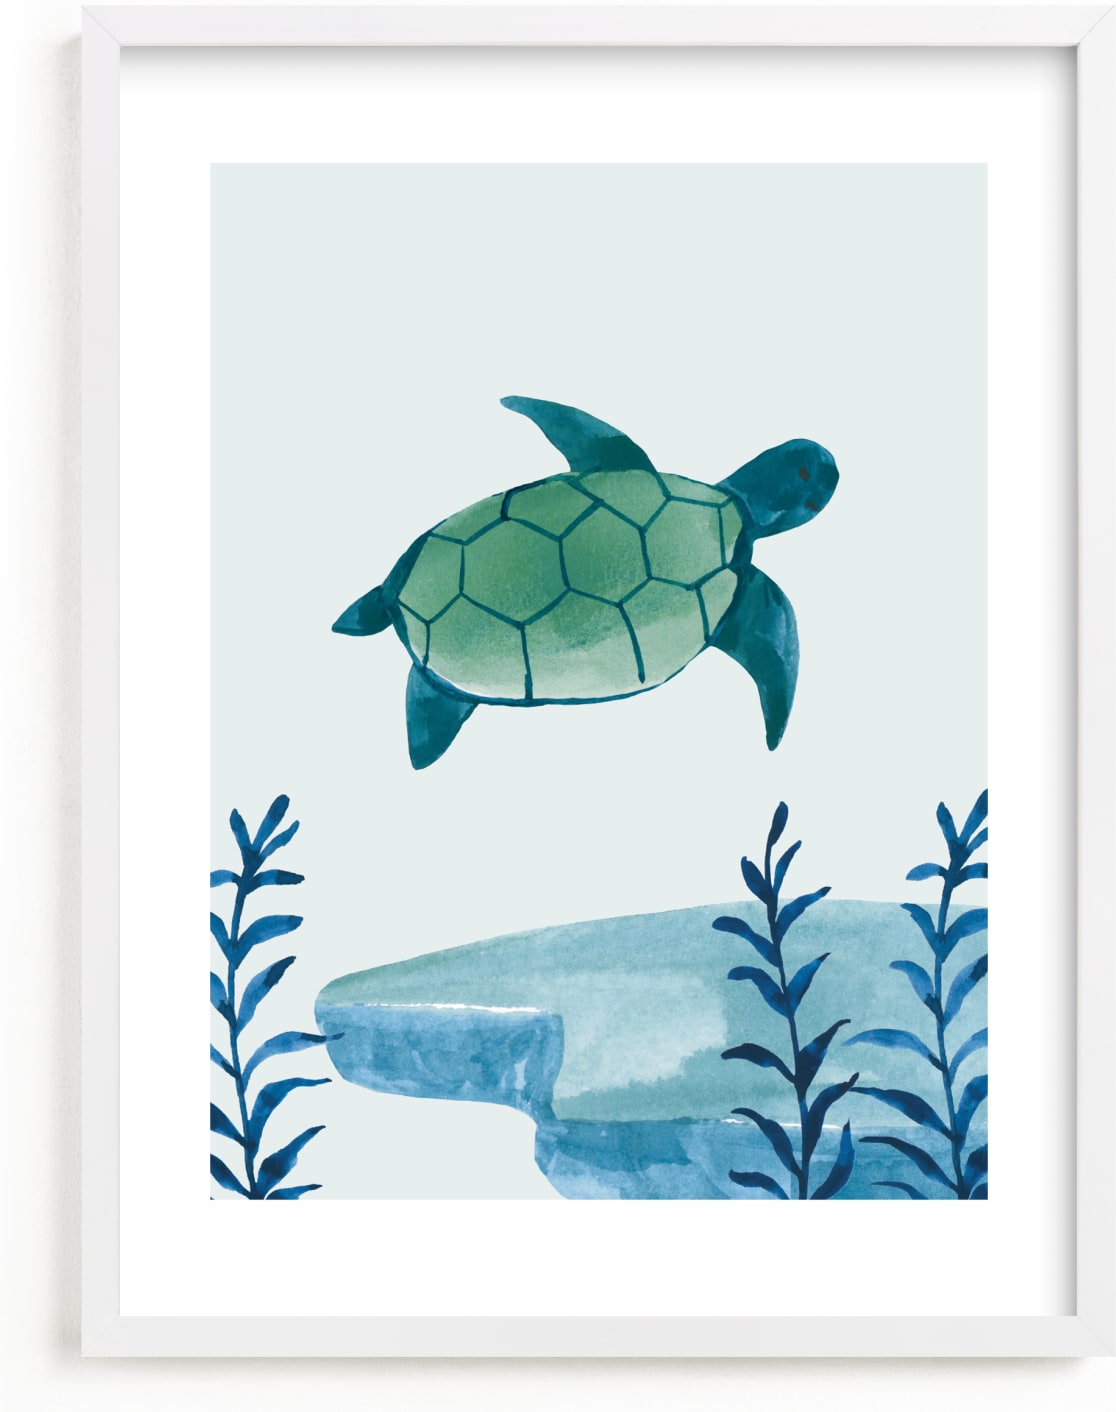 This is a blue, green art by Teju Reval called Ocean Friends III.